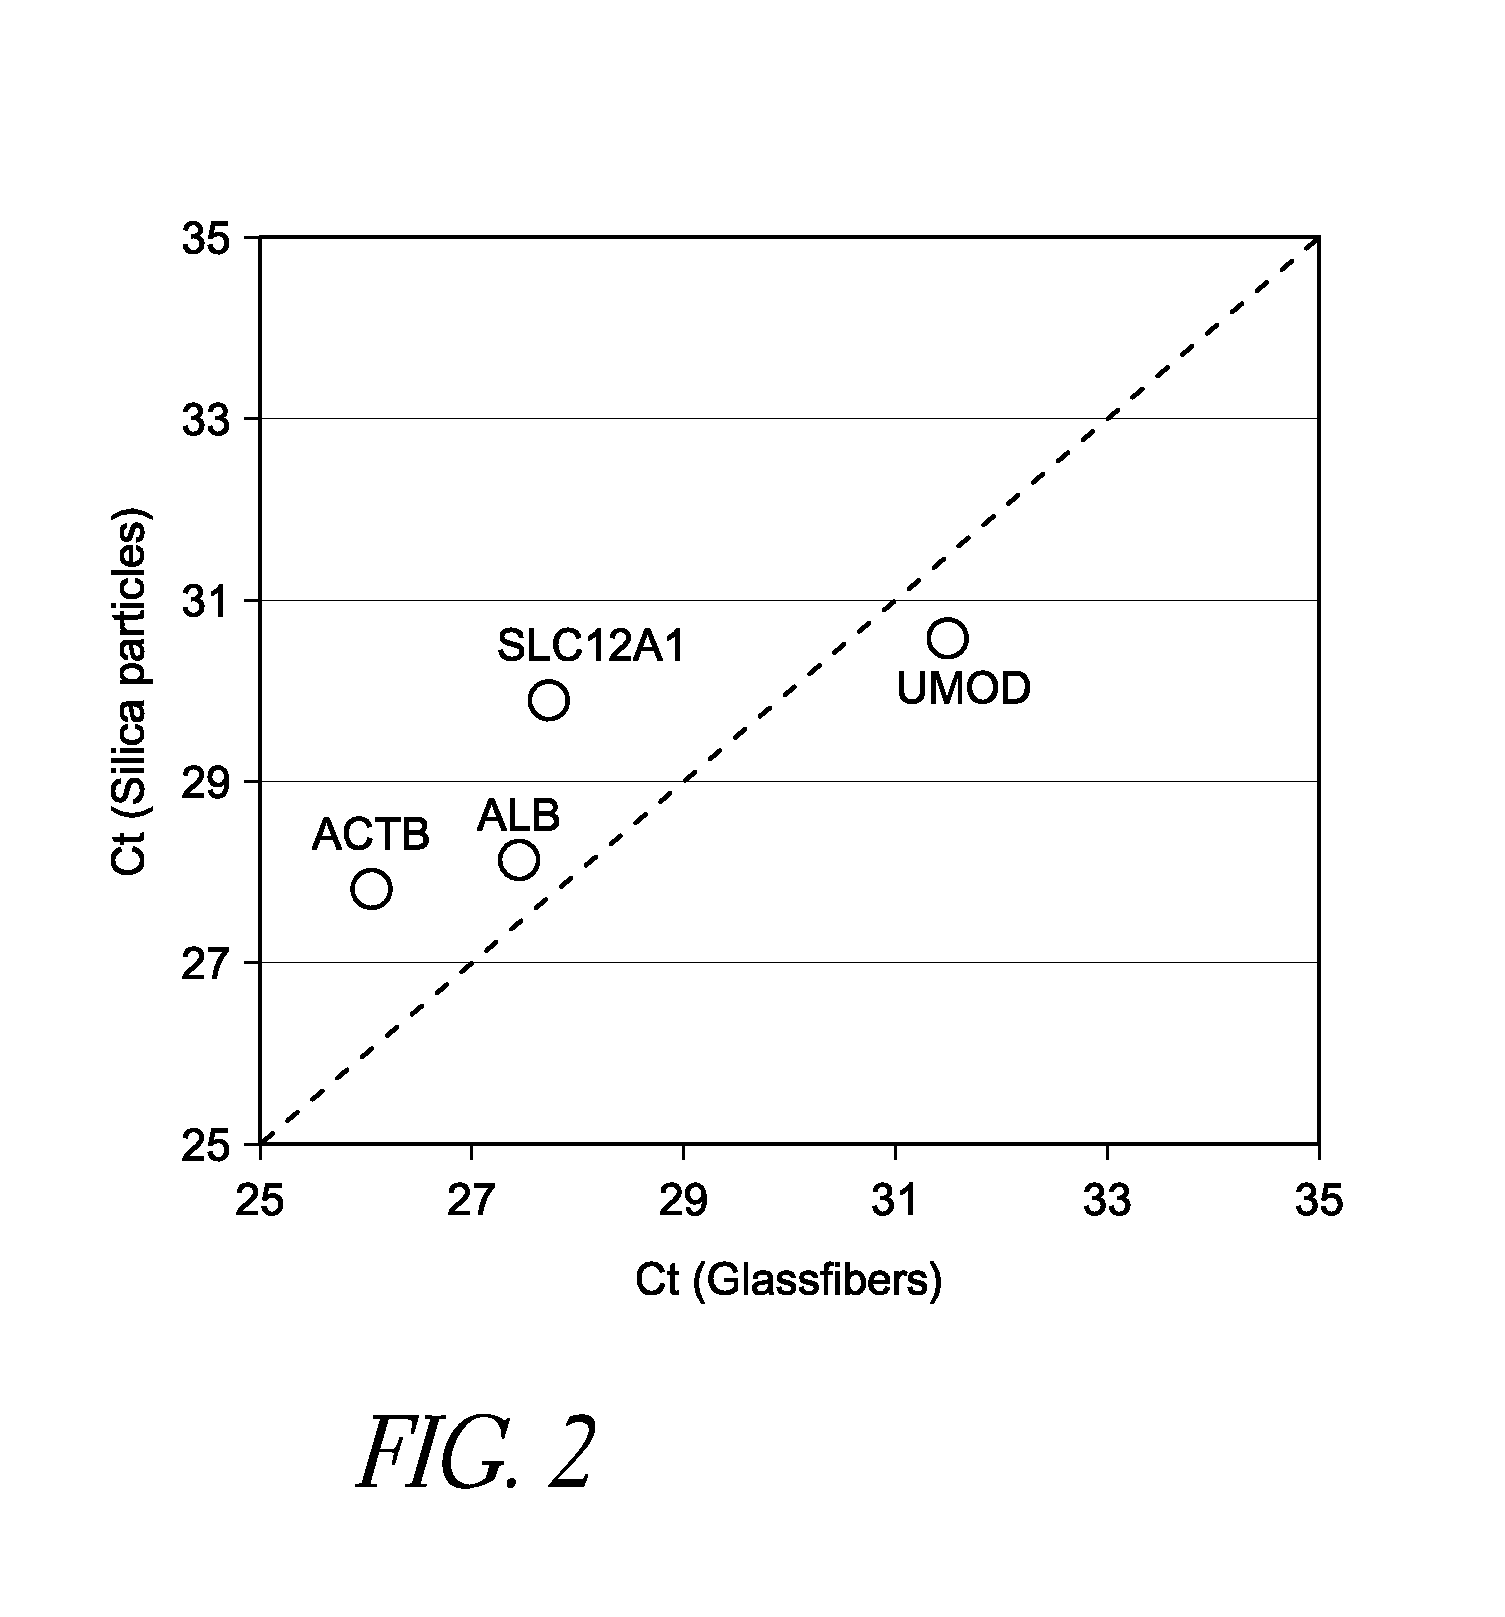 Methods for isolation of biomarkers from vesicles